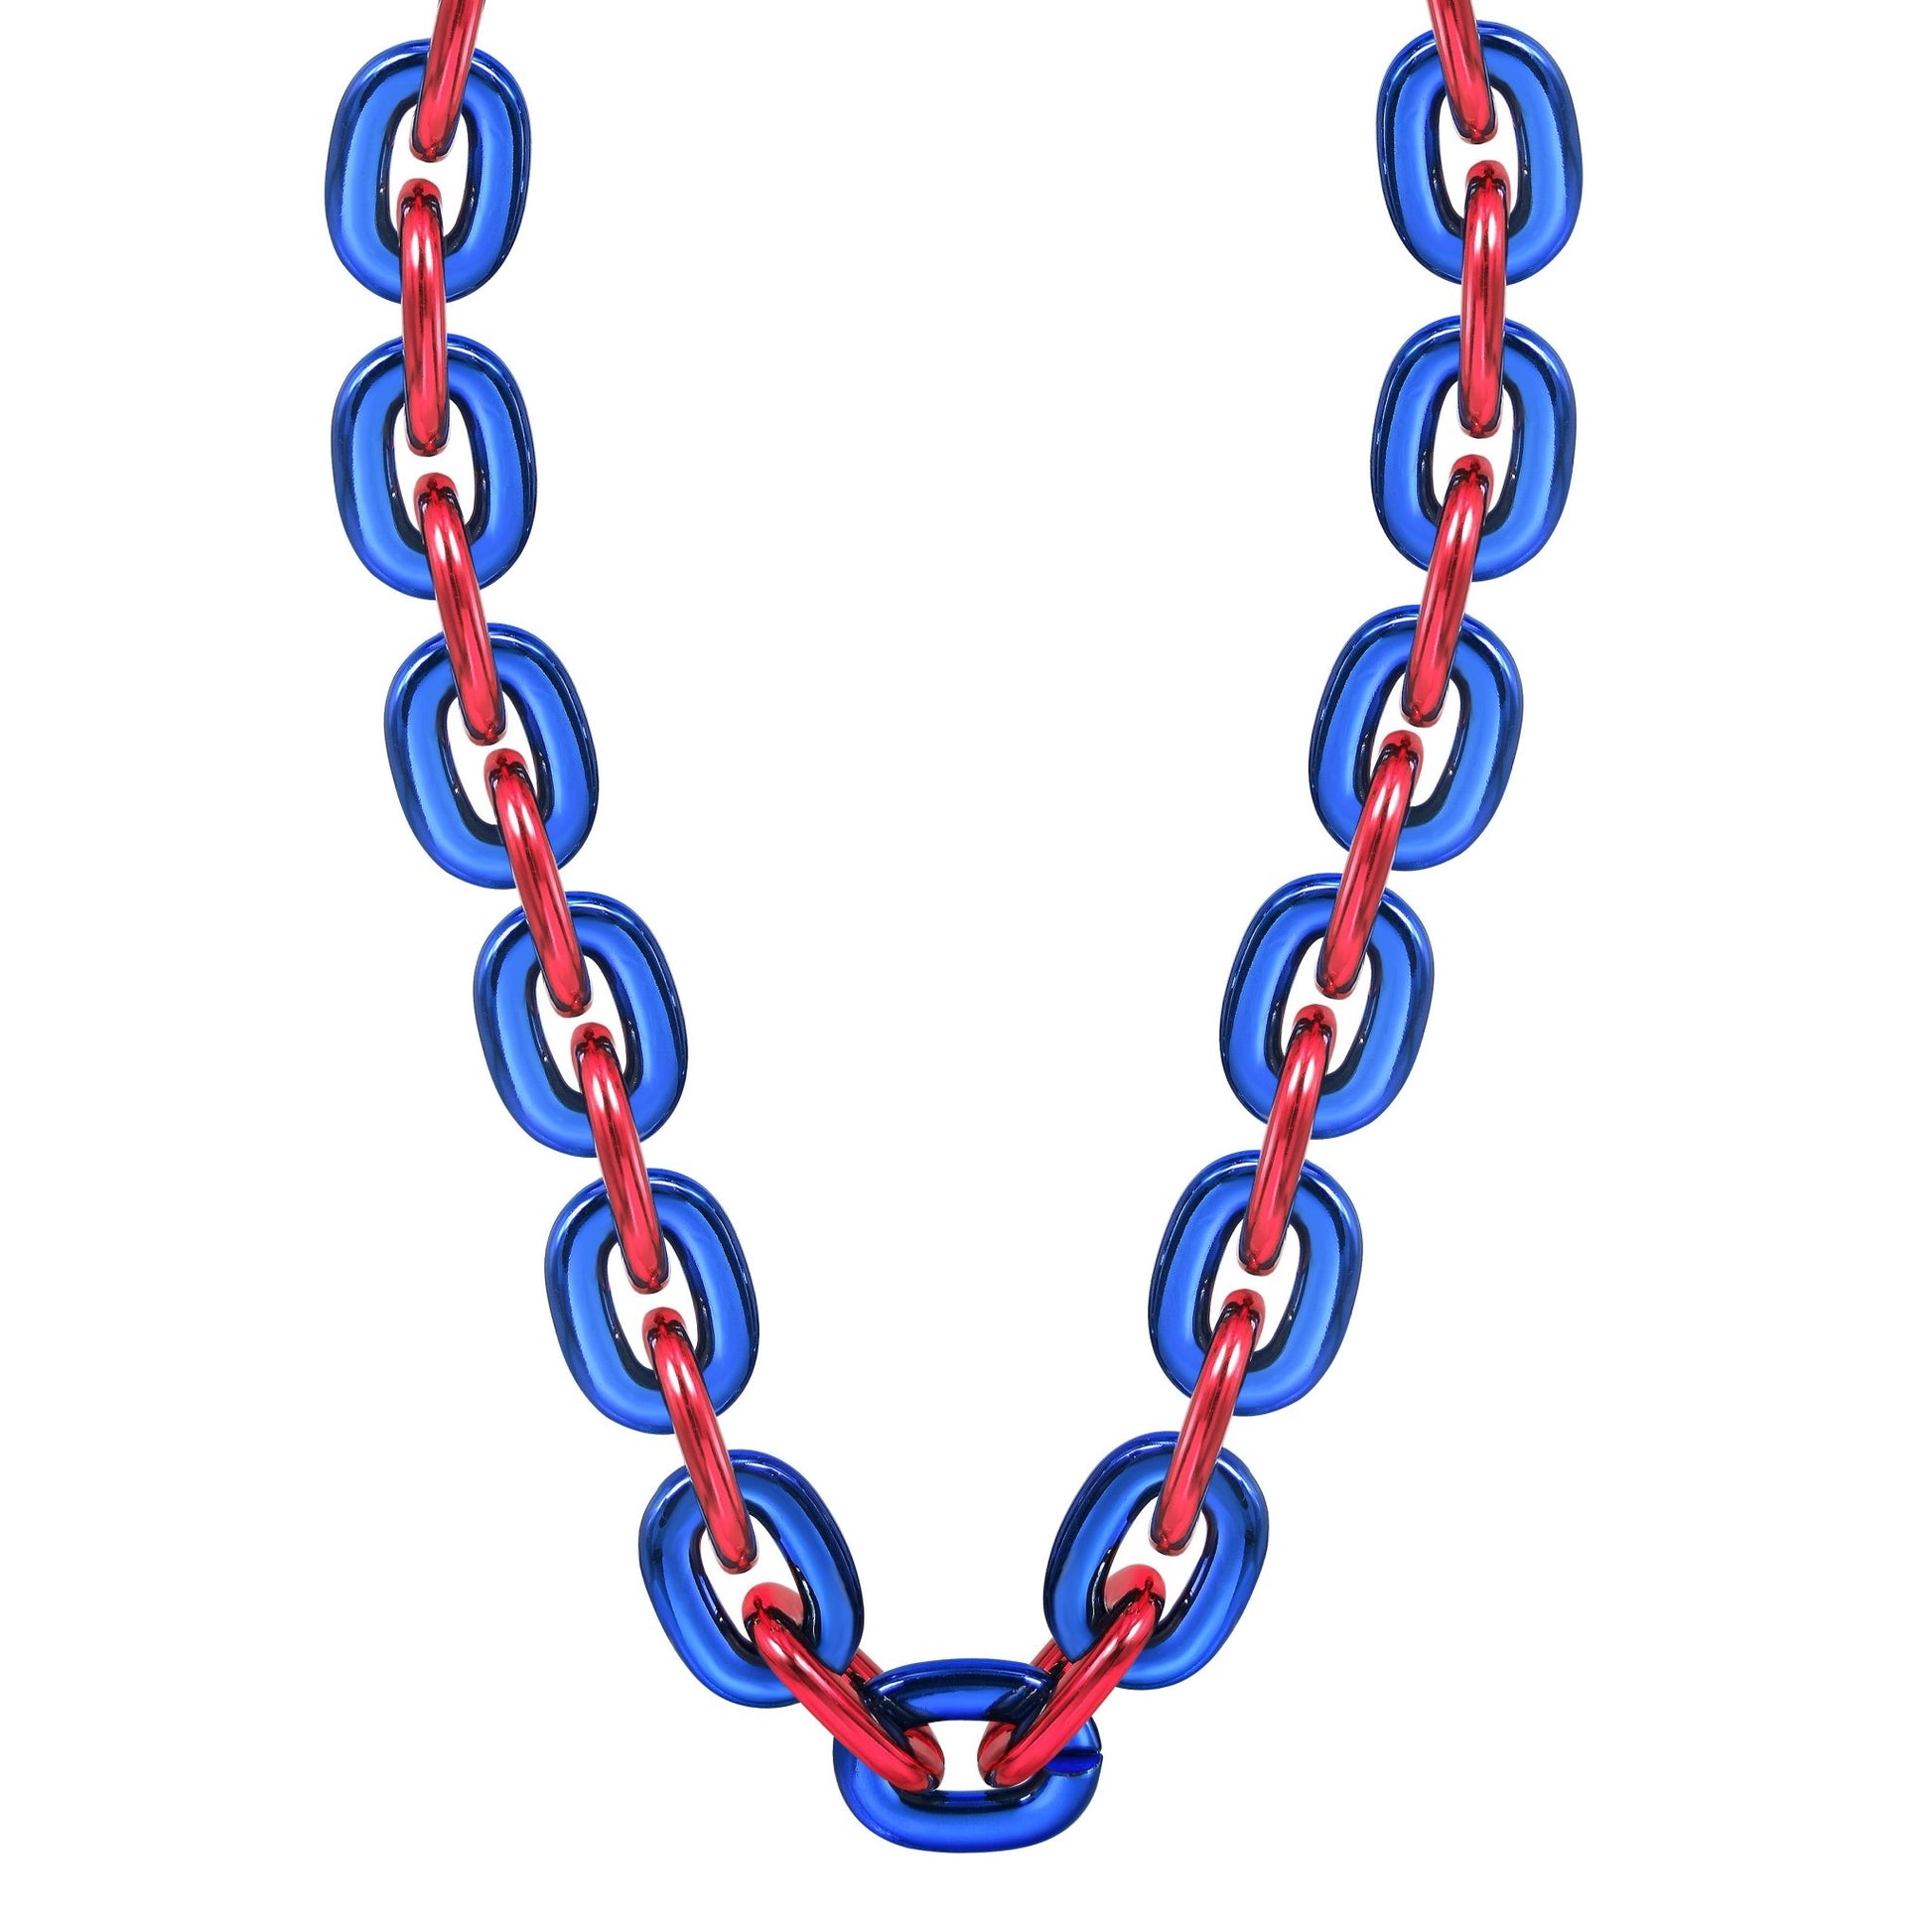 Jumbo Fan Chain Necklace - Gamedays Gear - Royal Blue / Red